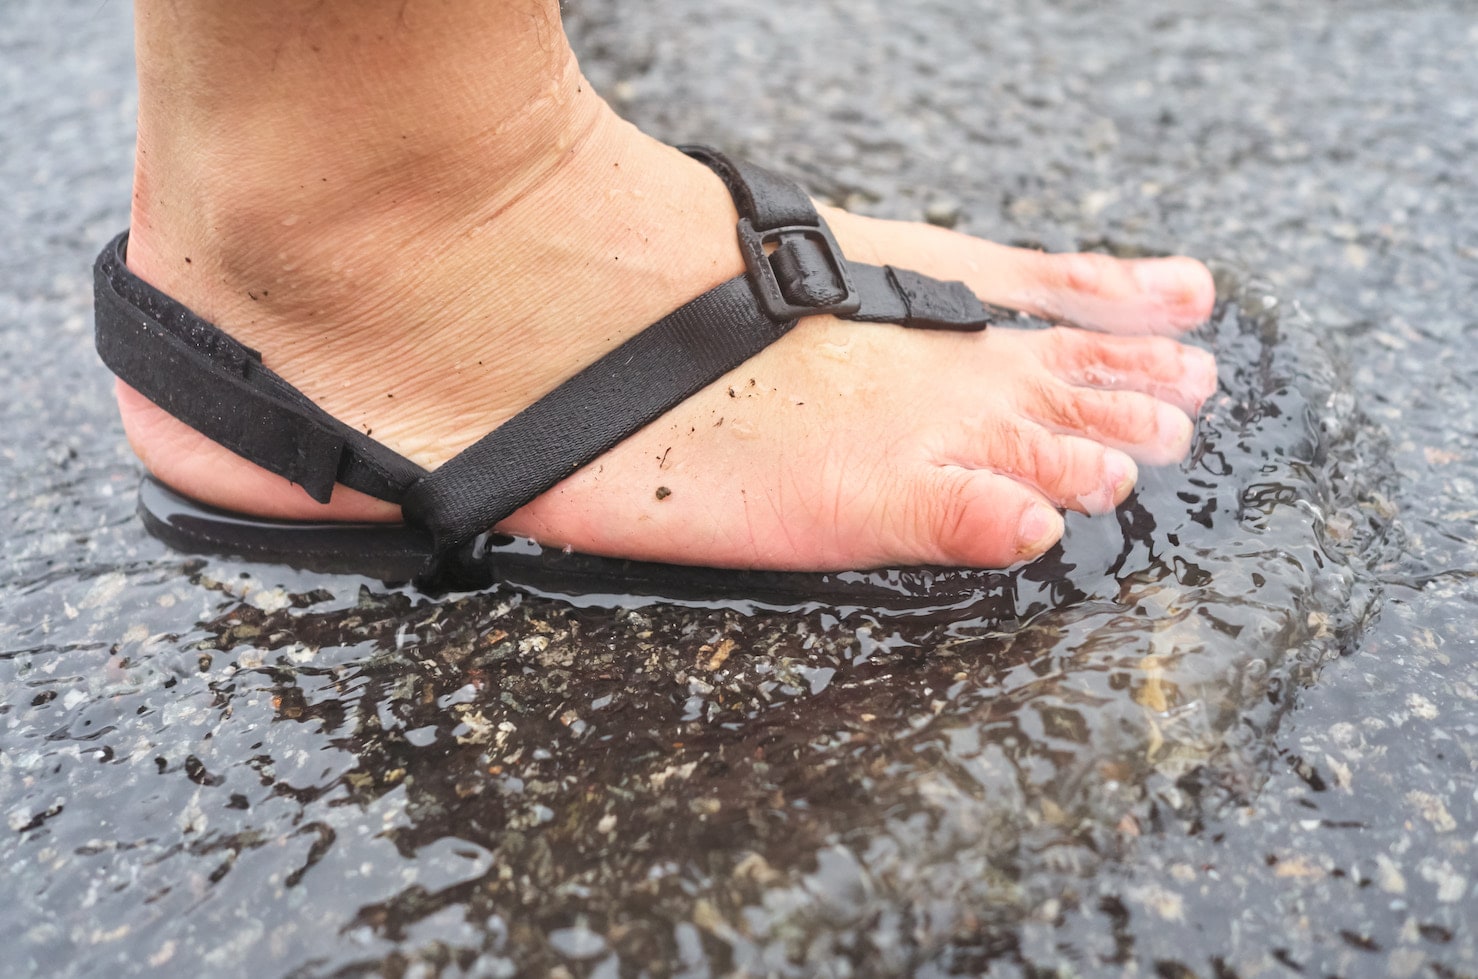 The new Ultragrip footbed adds an extra level of adherence and stickiness while providing a waterproof platform for all kinds of outdoor adventures